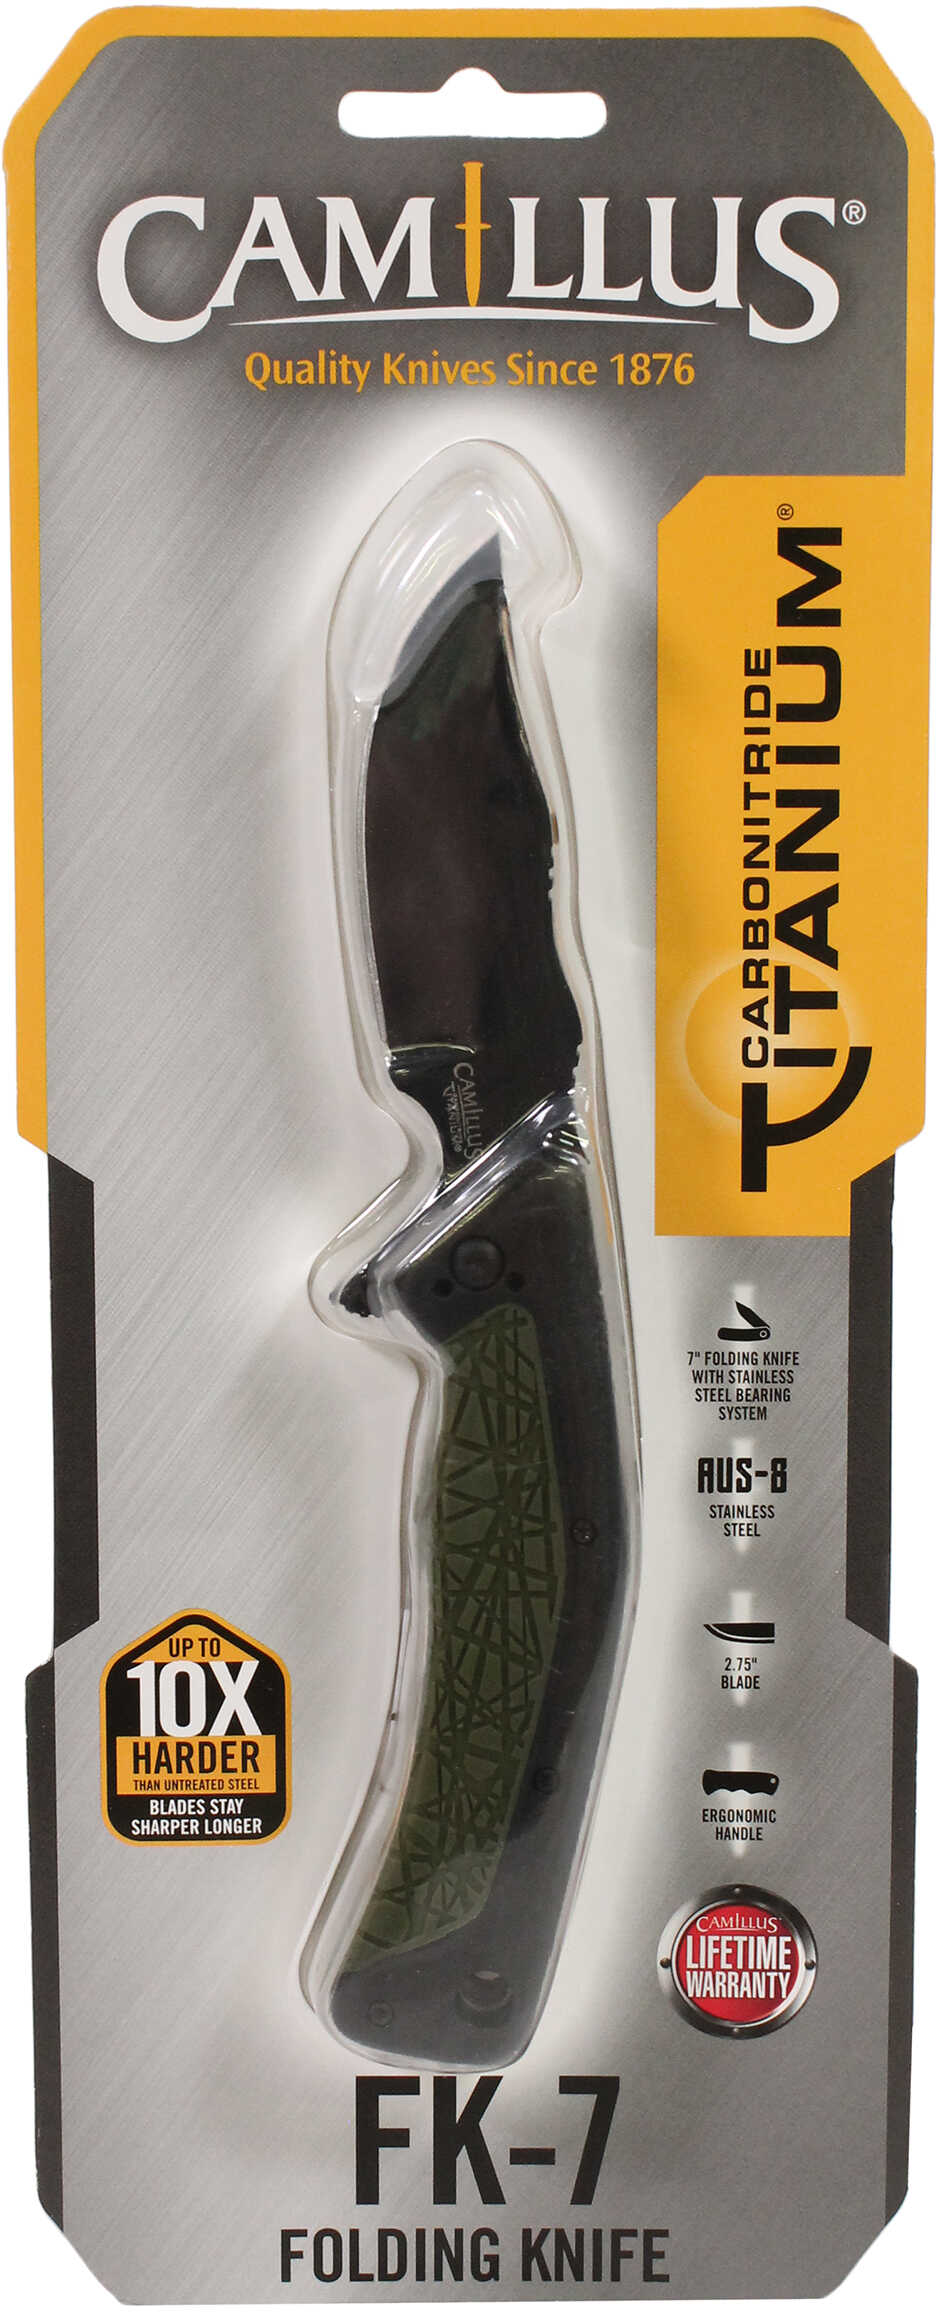 Camillus FK-7 Folding Knife 2.75 inch Blade 7 Overall